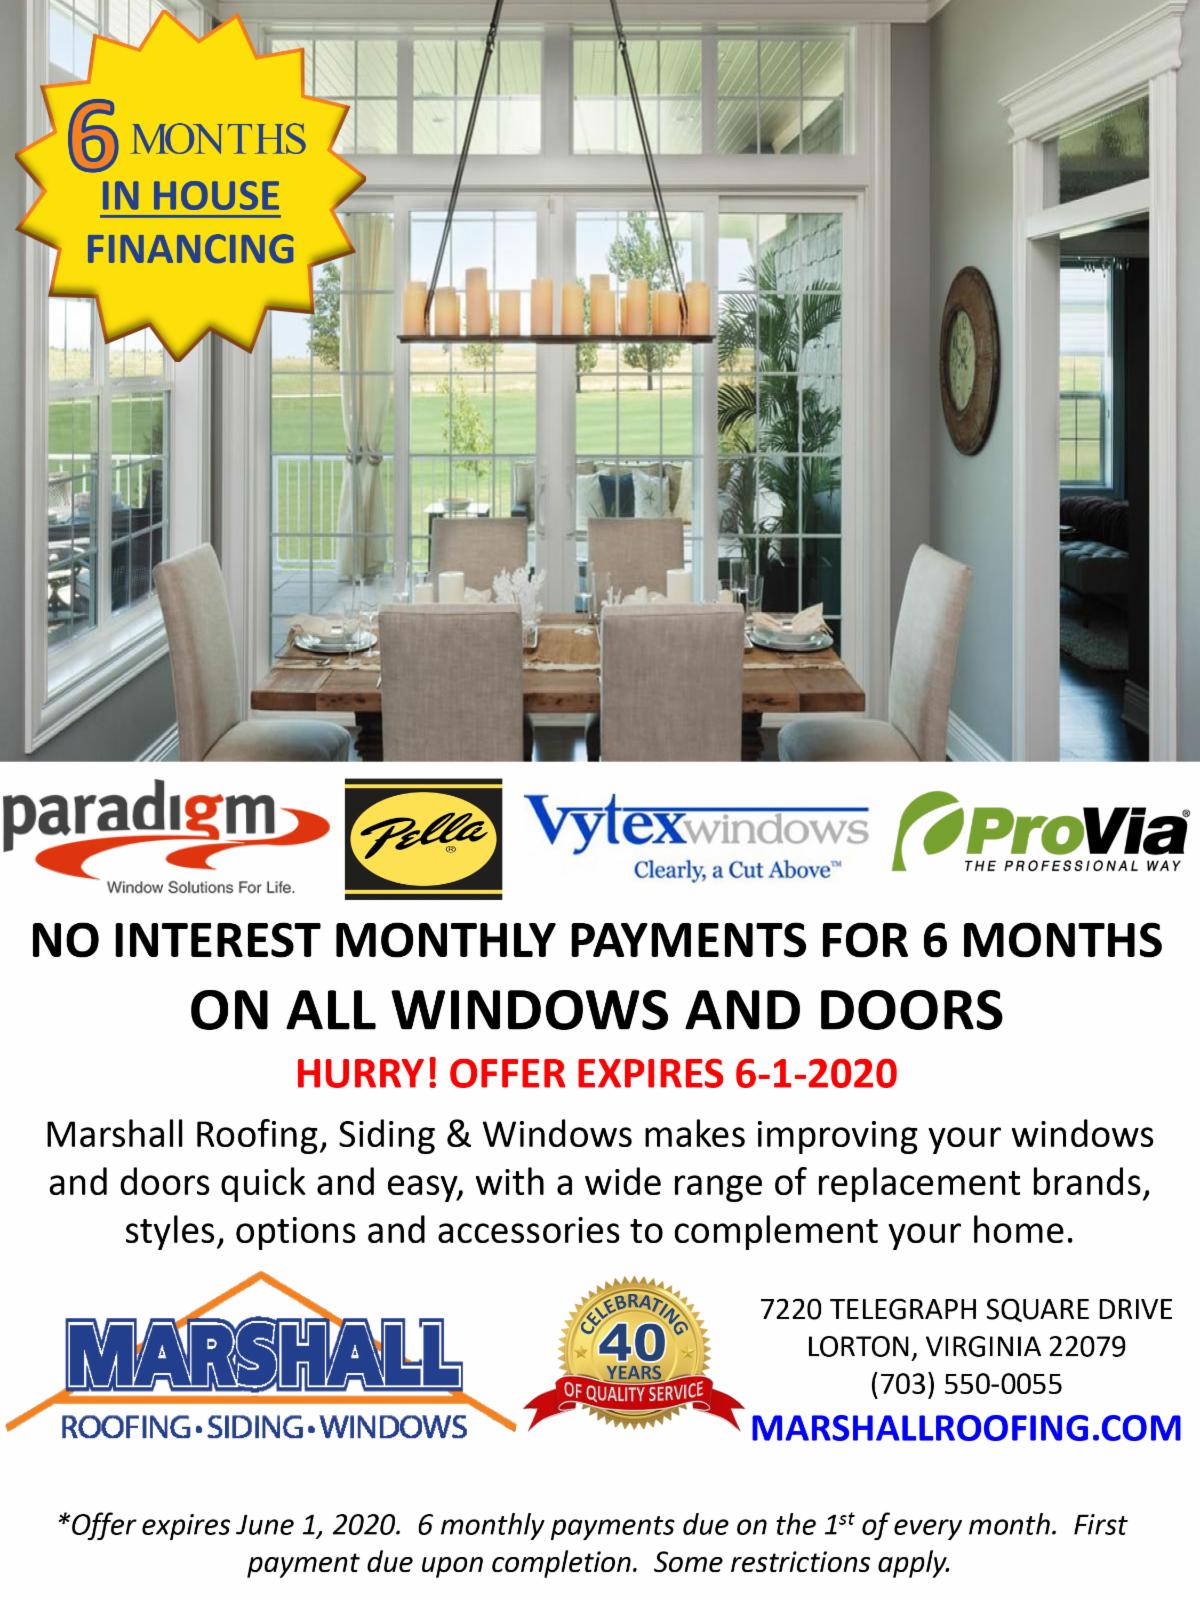 Financing available for windows and door replacements throughout May «  Marshall Roofing, Siding and Windows